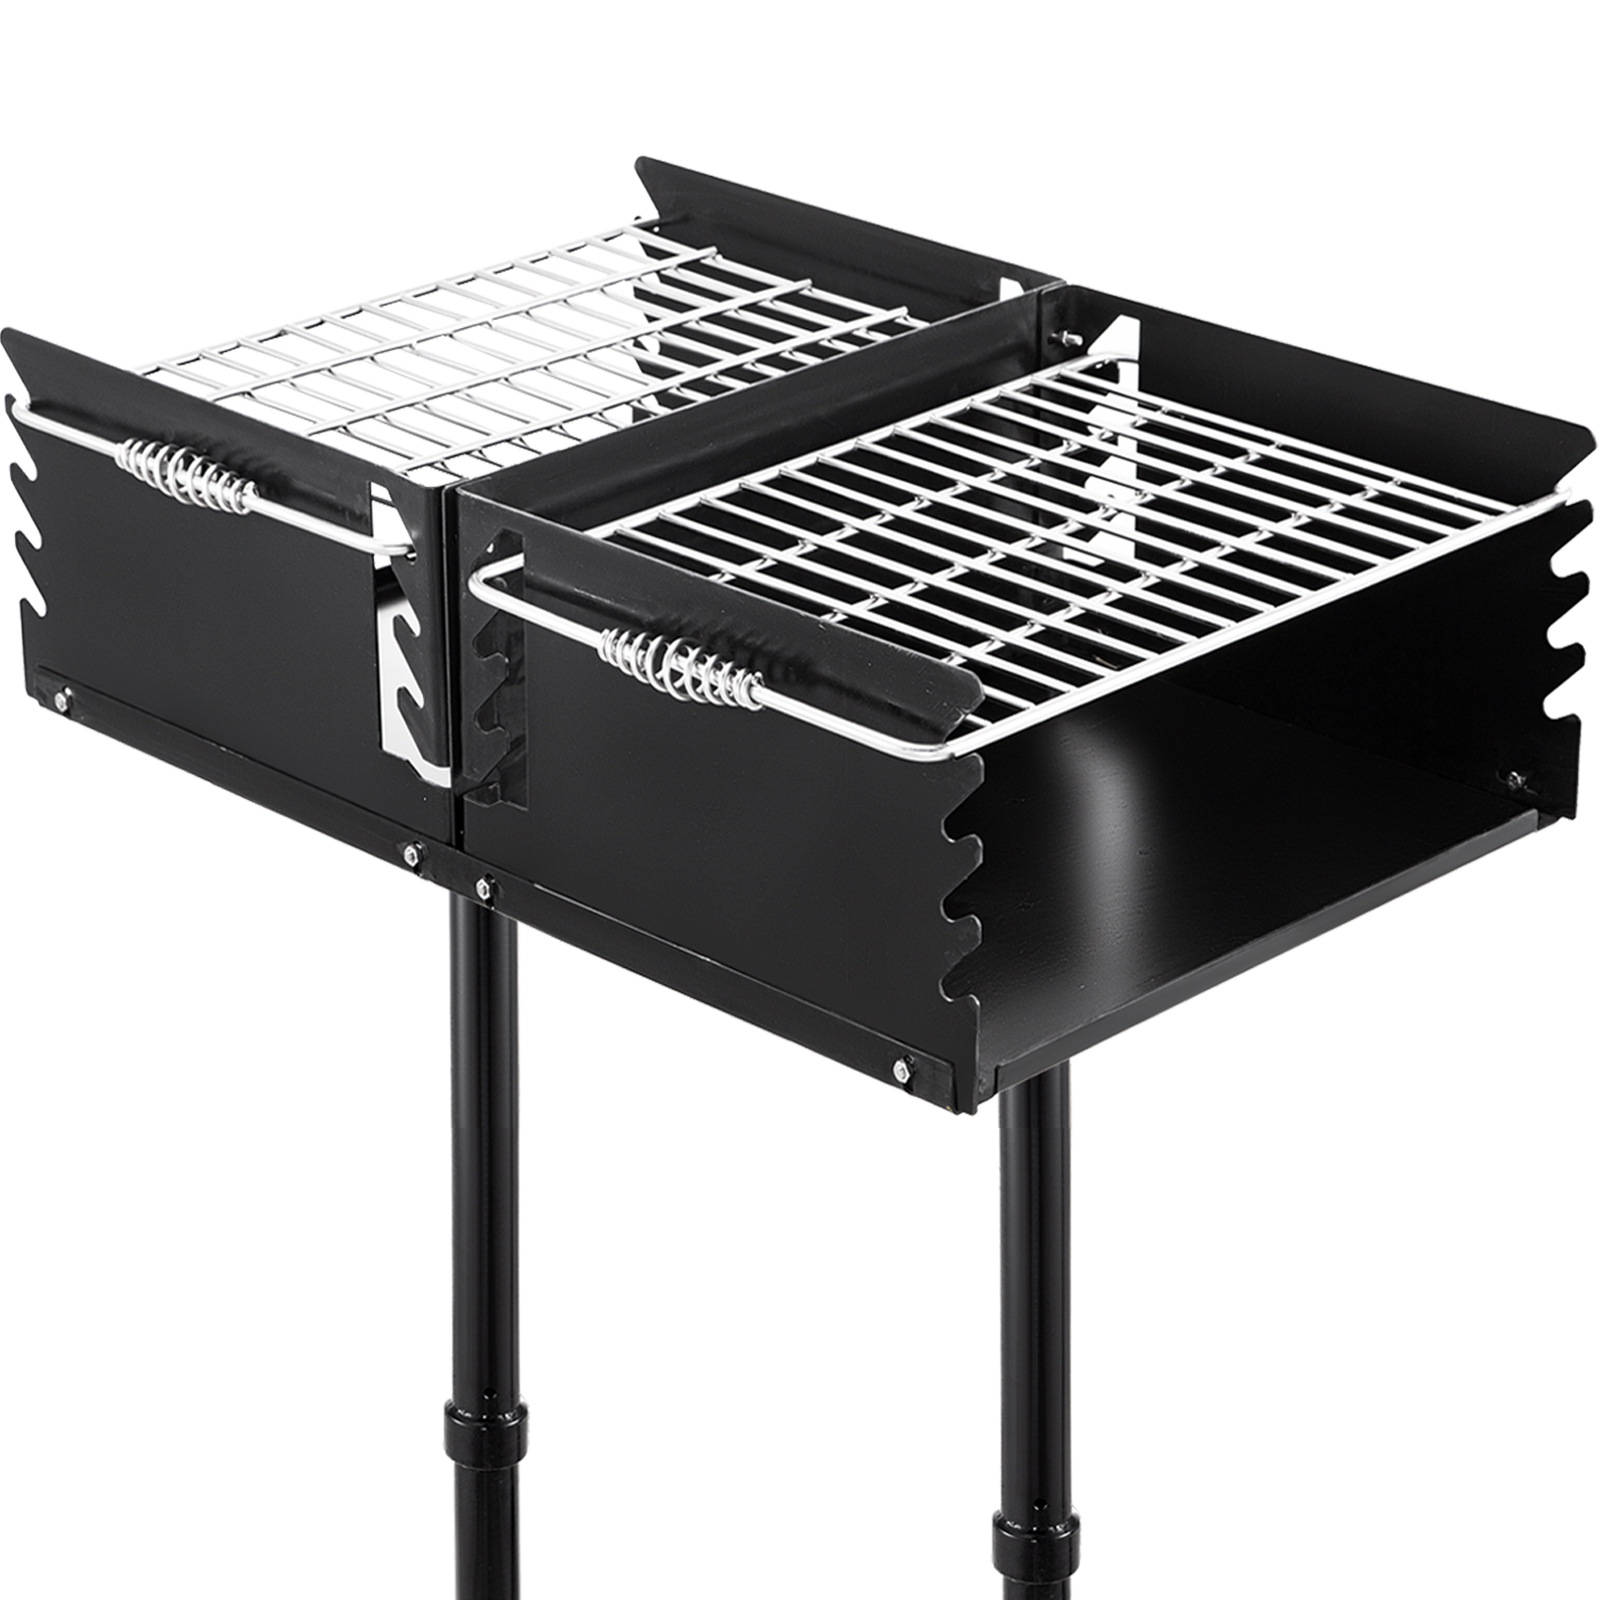 Park-style Camping Outdoor Double Post Steel Bbq Charcoal Grill W/ Cooking Grate от Vevor Many GEOs